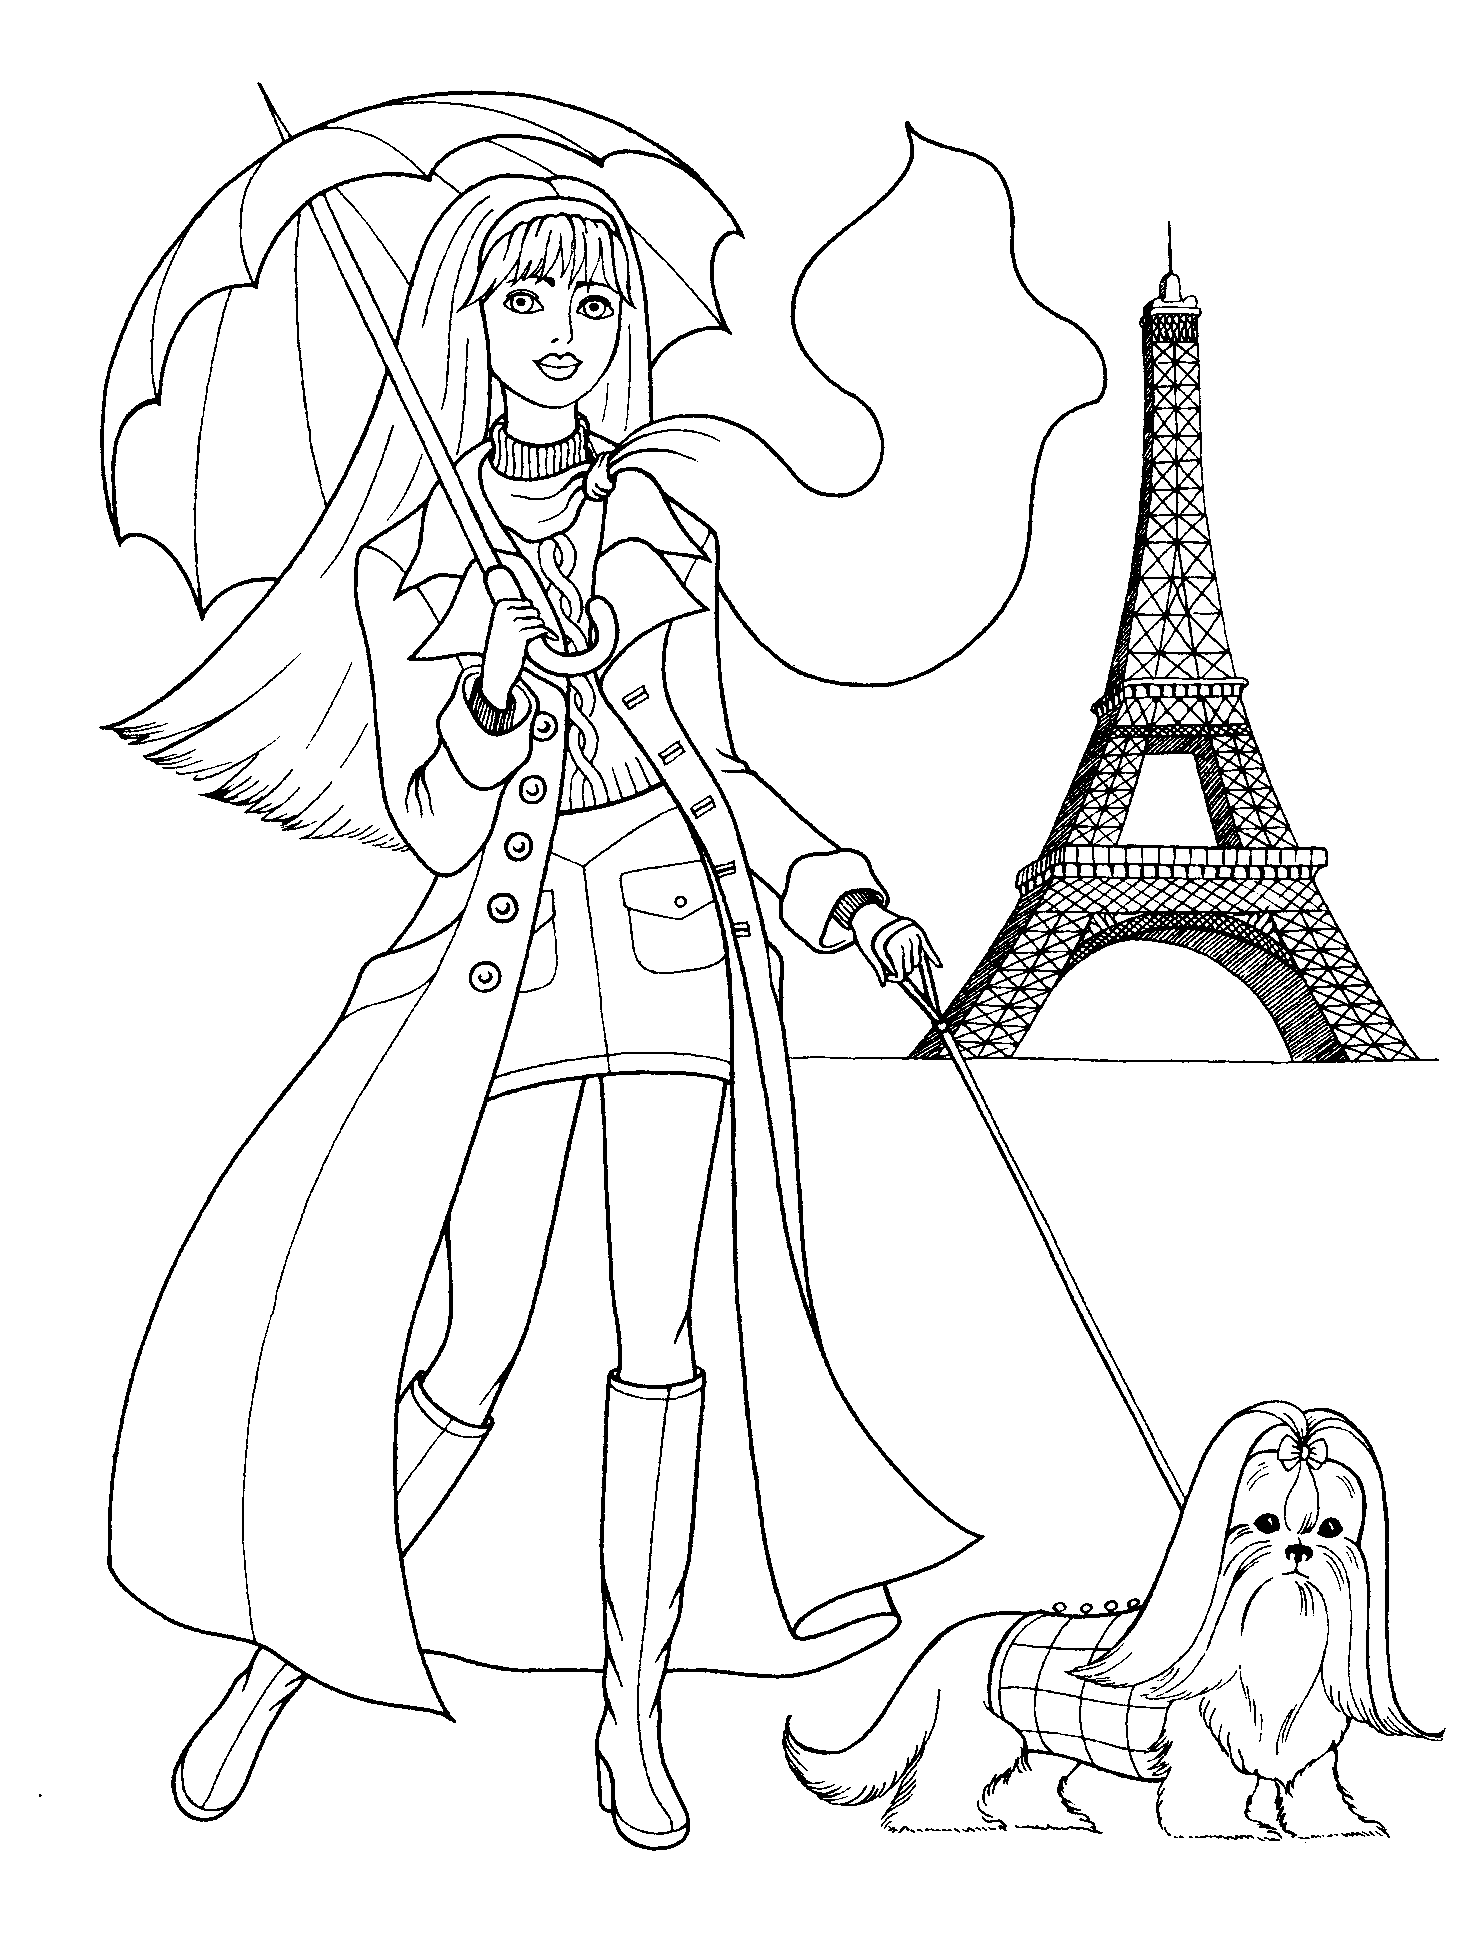 Coloring Pages For Teenagers Printable Free Image 4 - Gianfreda.net